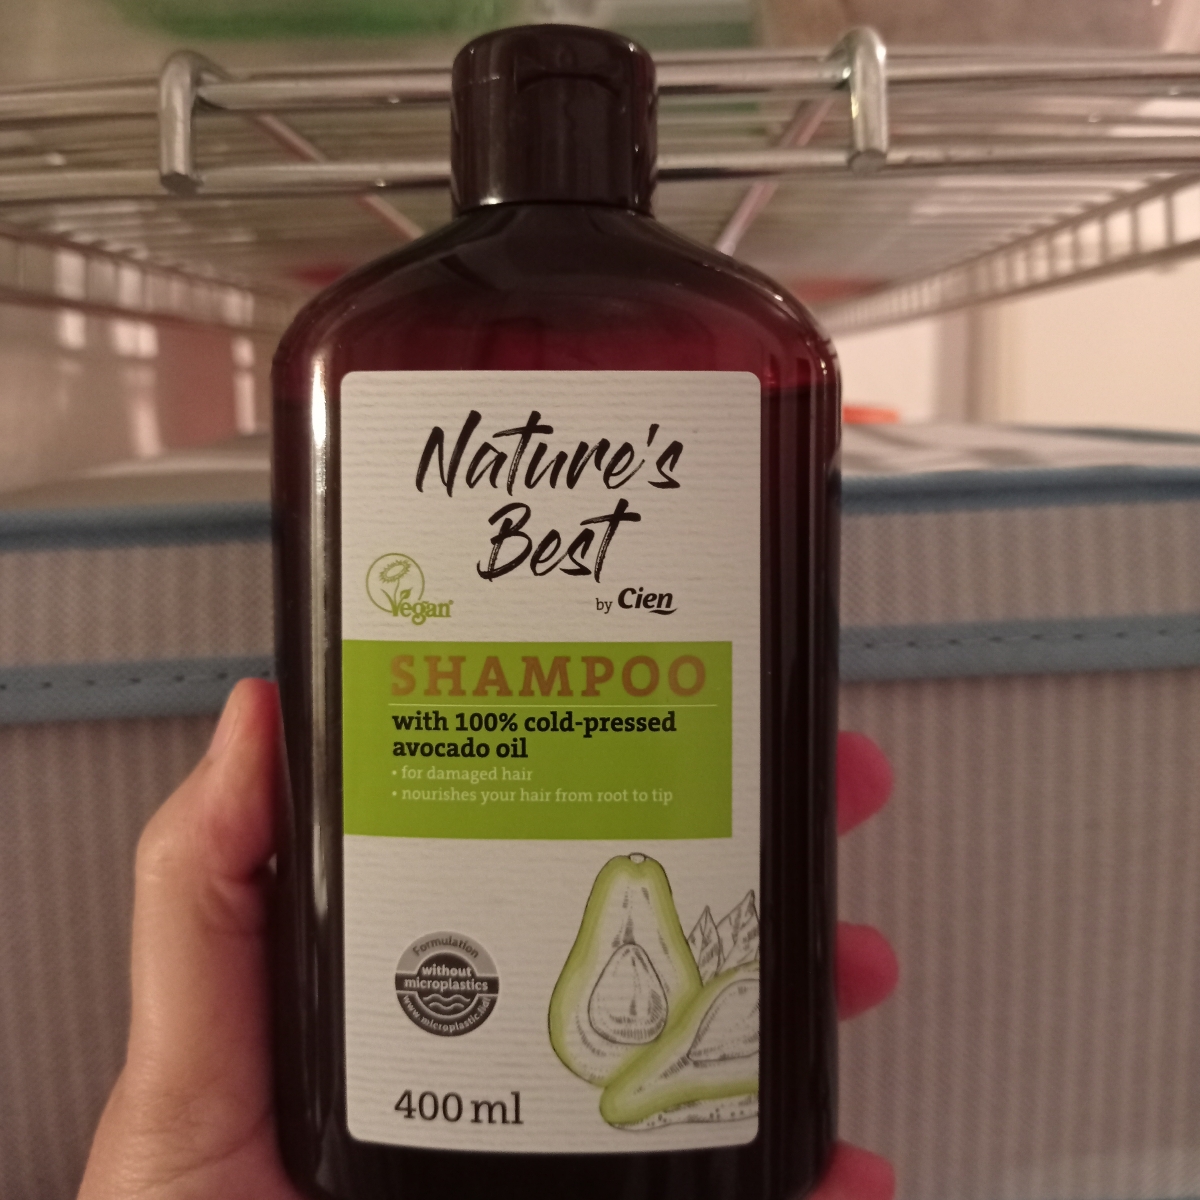 Nature's best by cien Shampoo with cold pressed avocado oil Reviews |  abillion